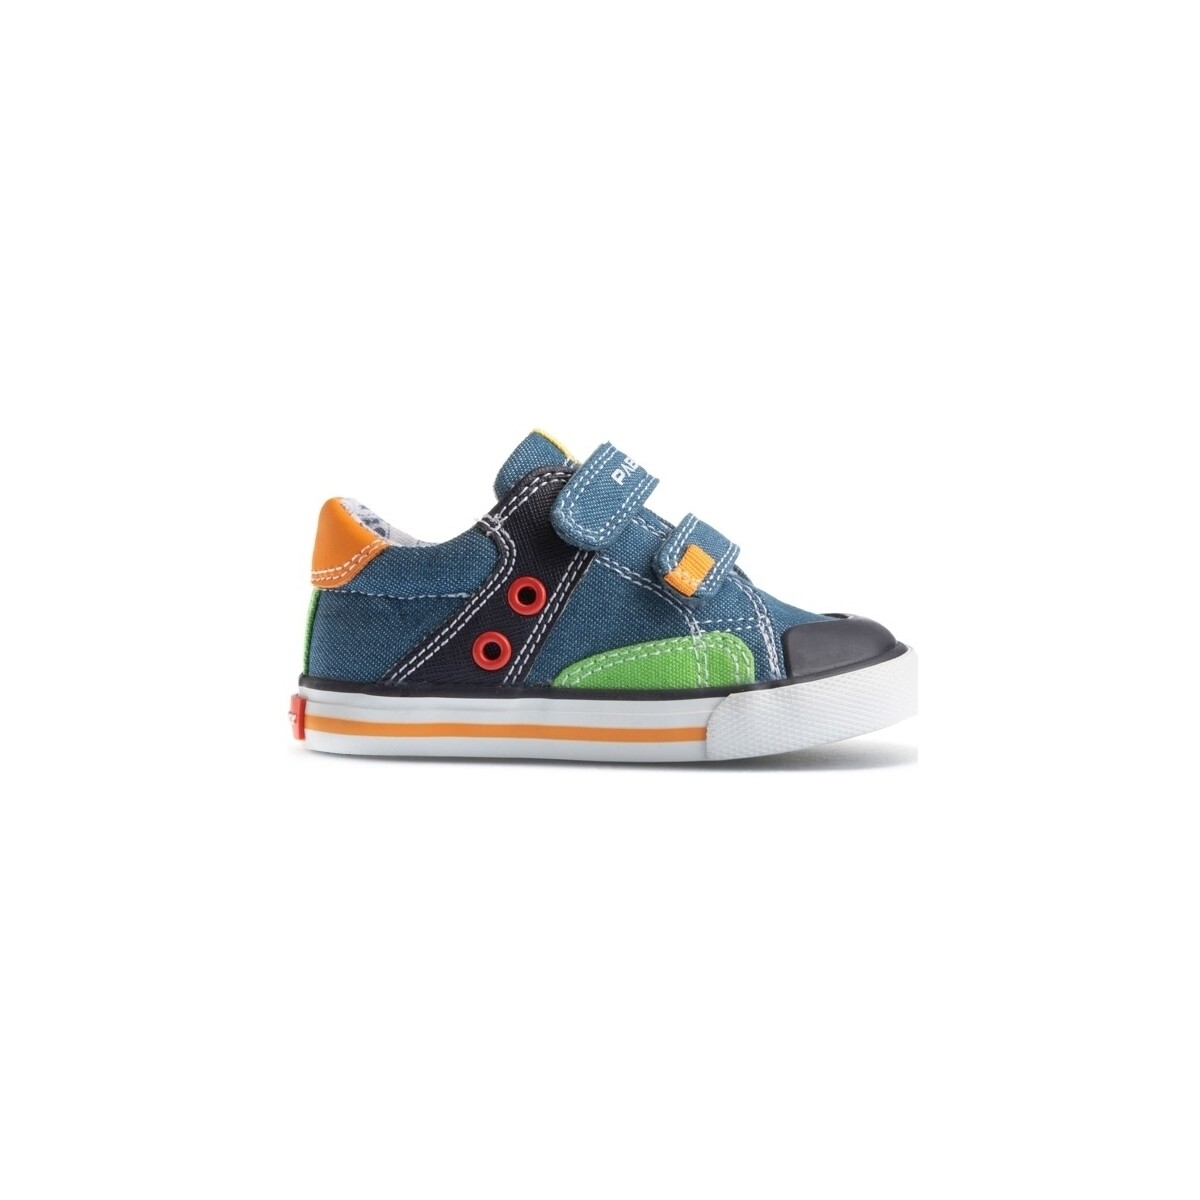 Pablosky  Sneakers Pablosky Baby 971511 K - Denim Jeans